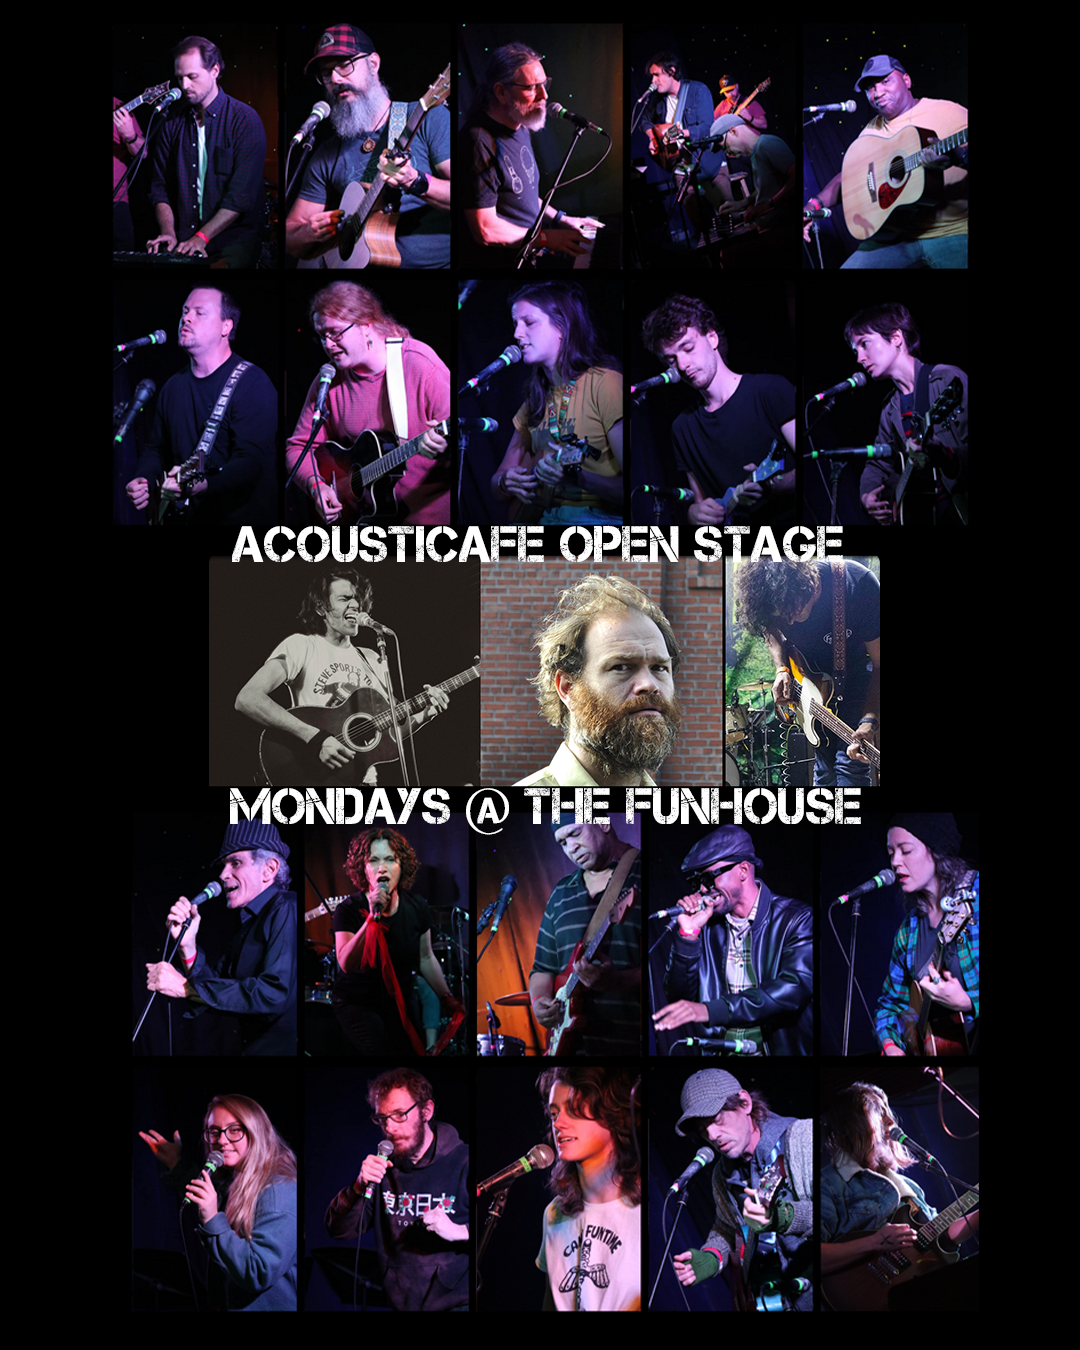 AcoustiCafe Open Stage Mondays in The Funhouse at Mr Smalls